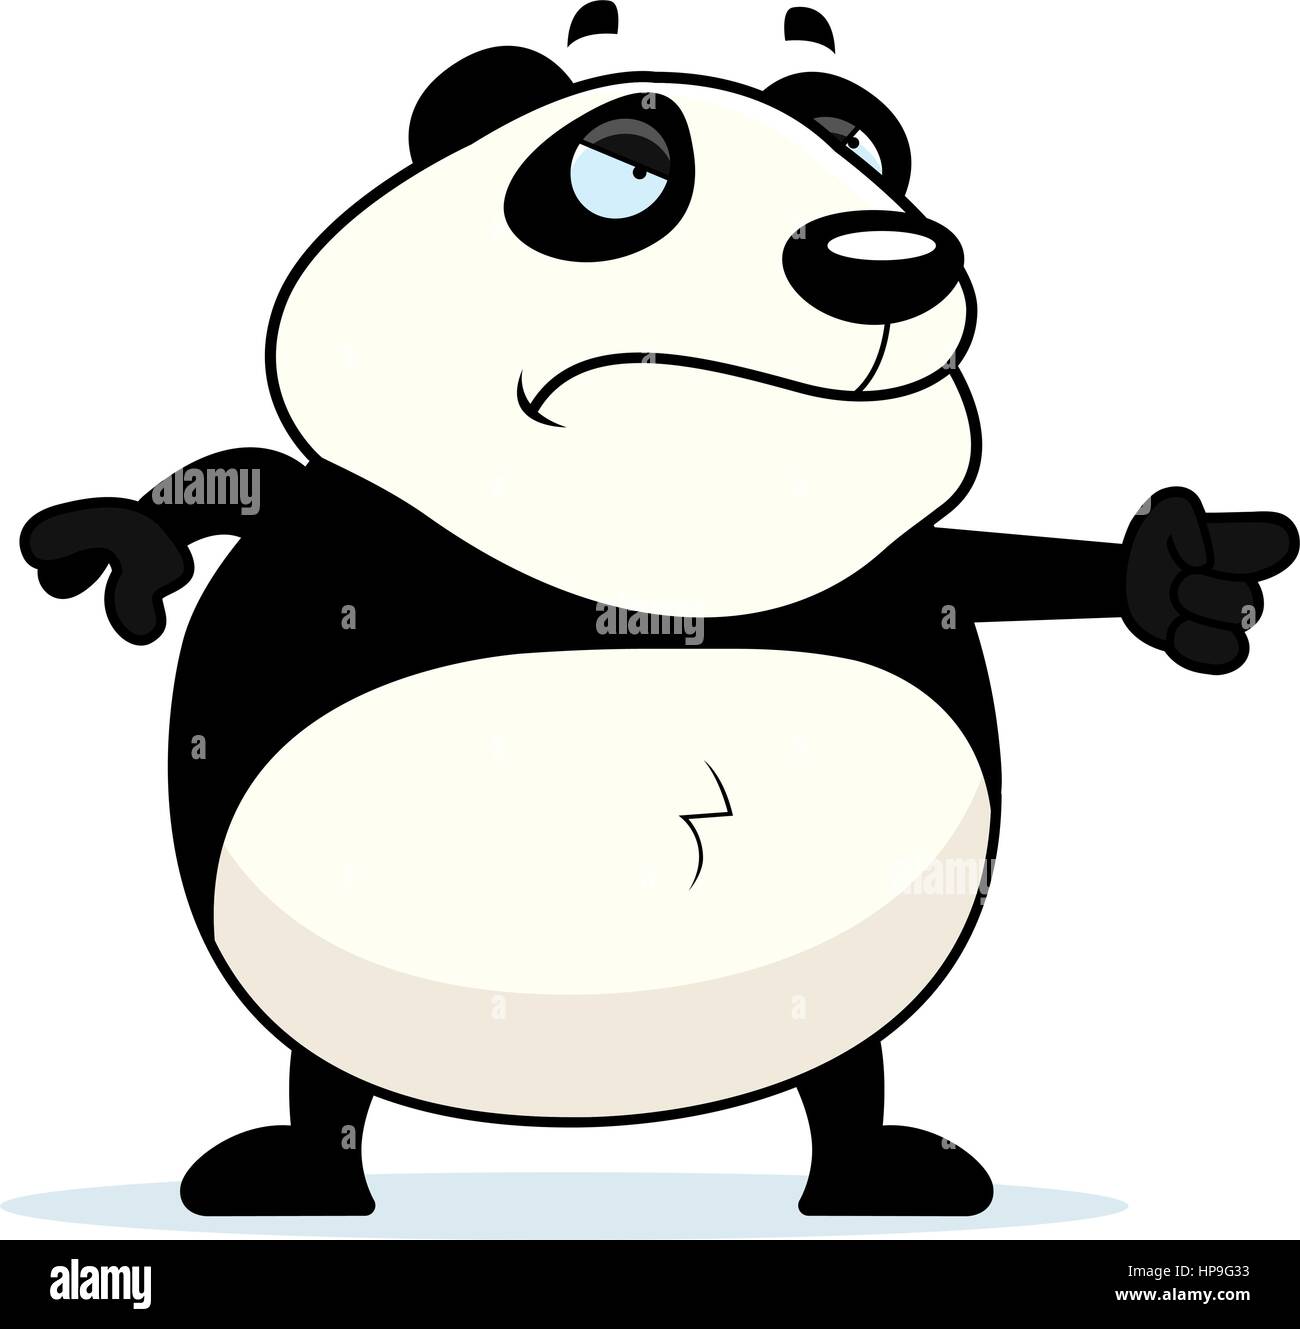 A cartoon panda with an angry expression. Stock Vector